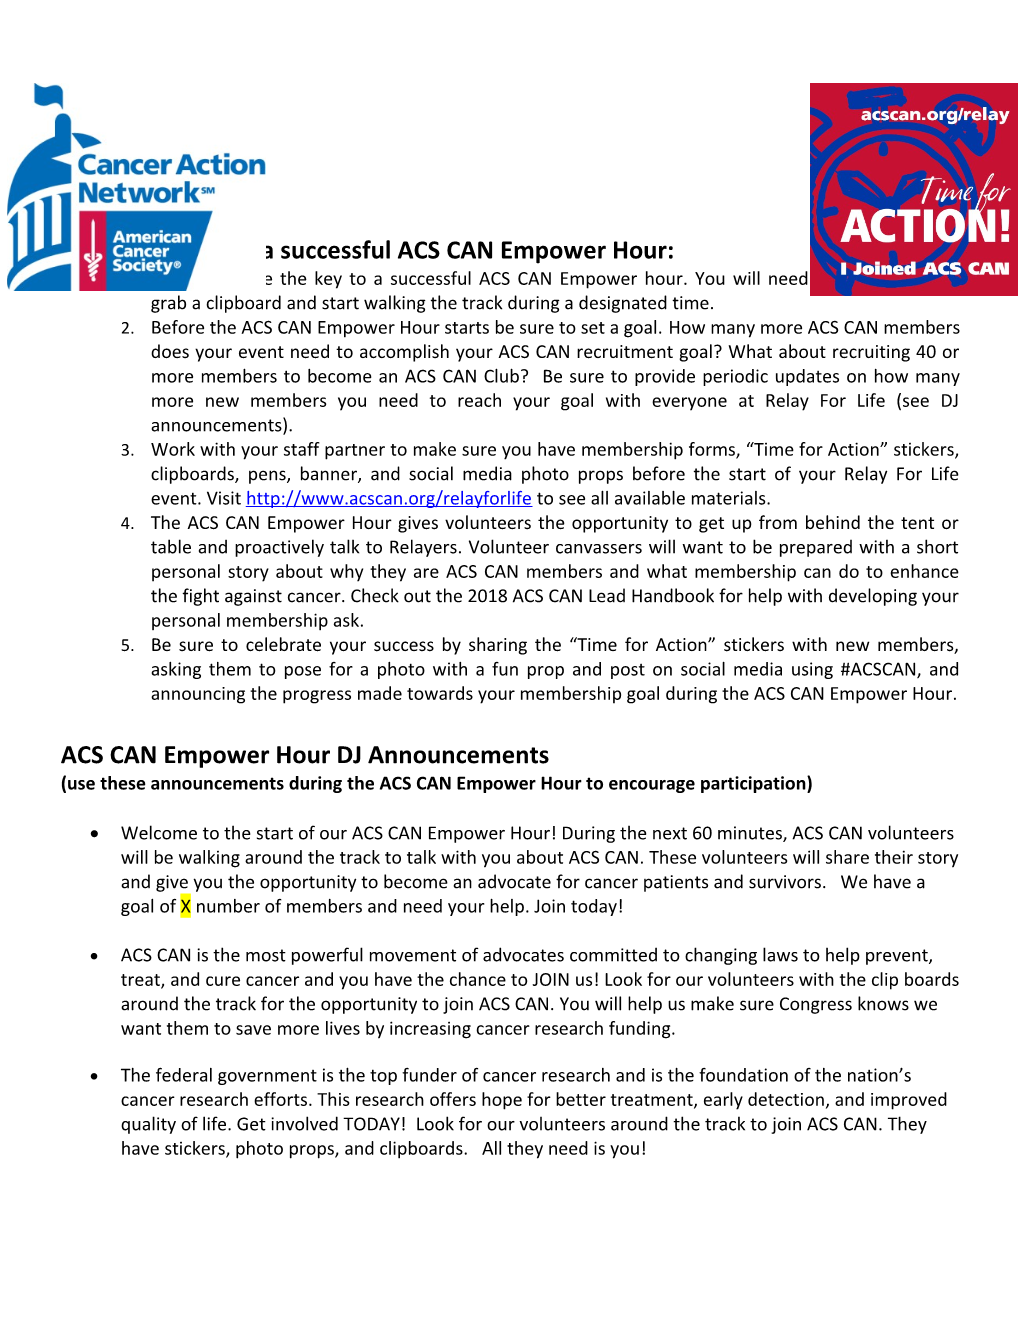 Five Easy Steps to a Successful ACS CAN Empower Hour